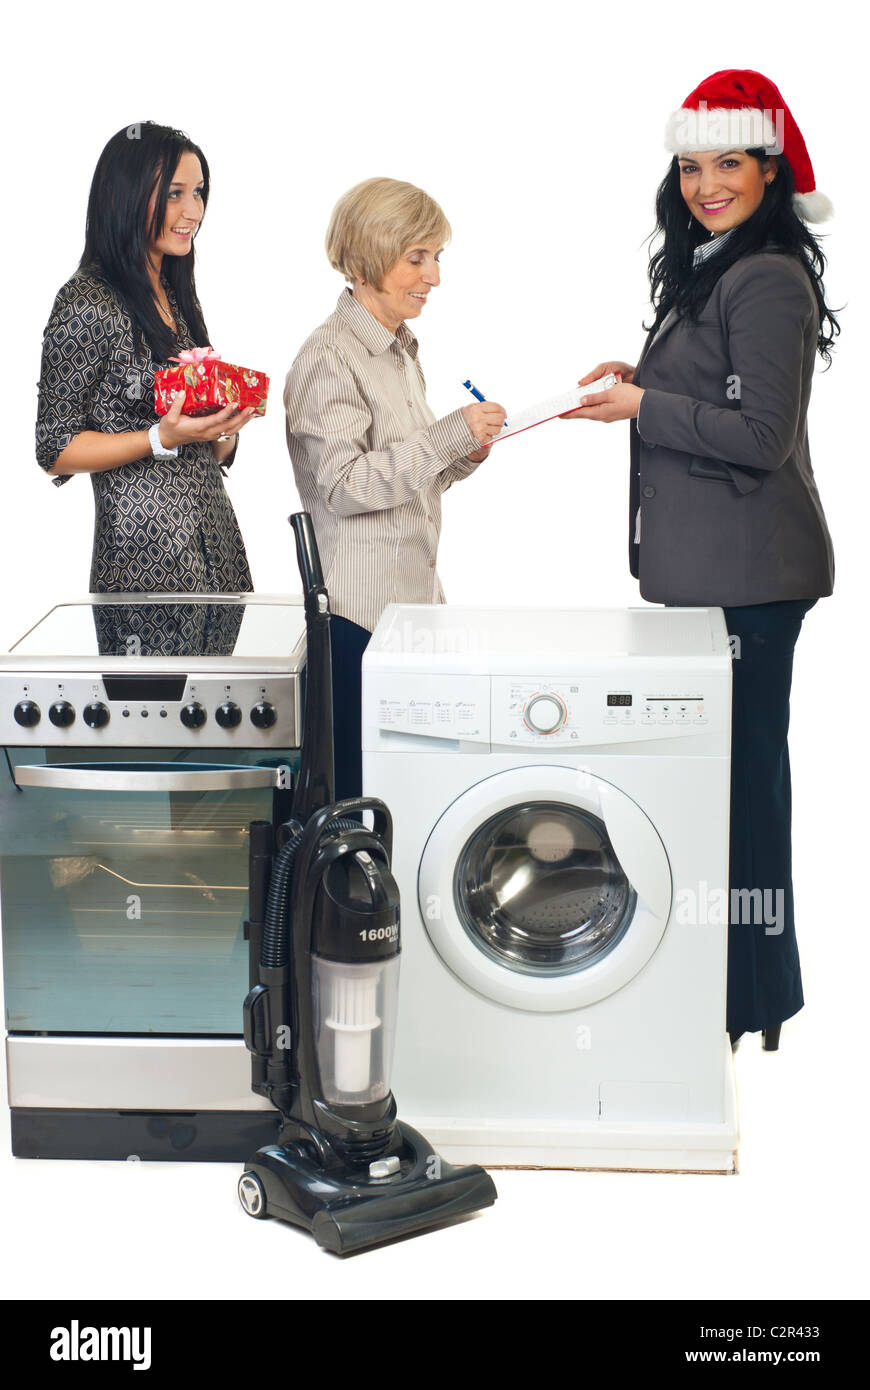 Appliance delivery. Hand truck, fridge, washing machine and microwave oven., Stock image